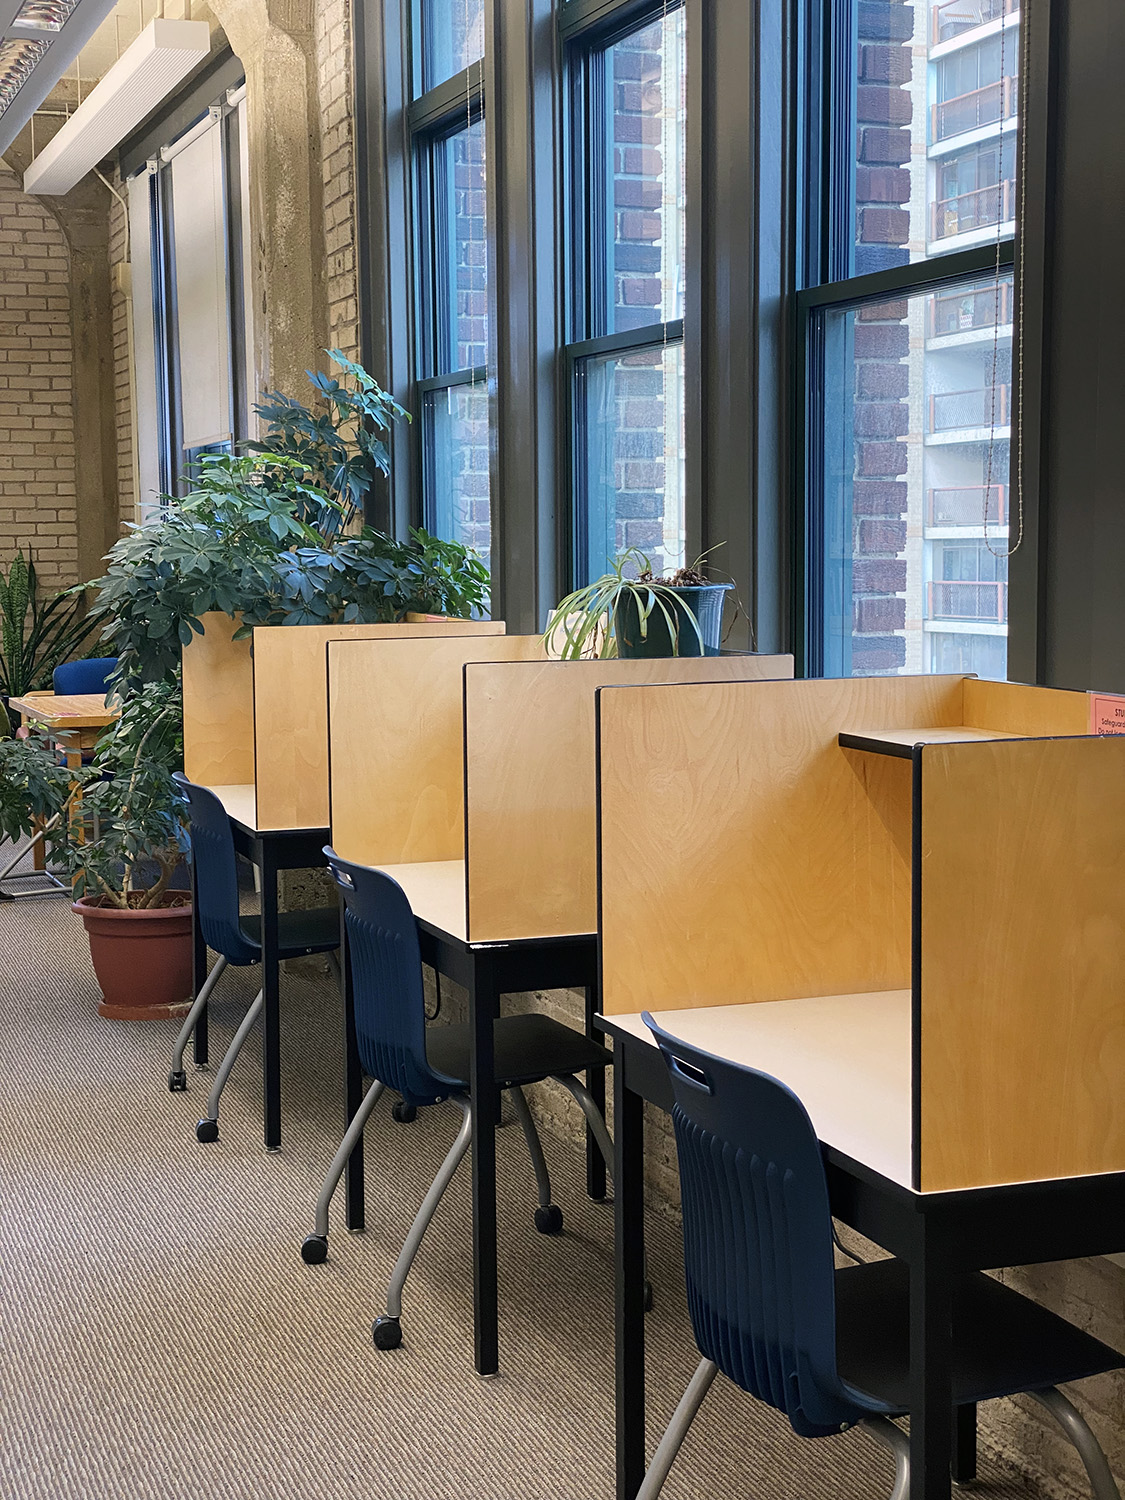 School desks in a line with privacy walls between them in a study centre